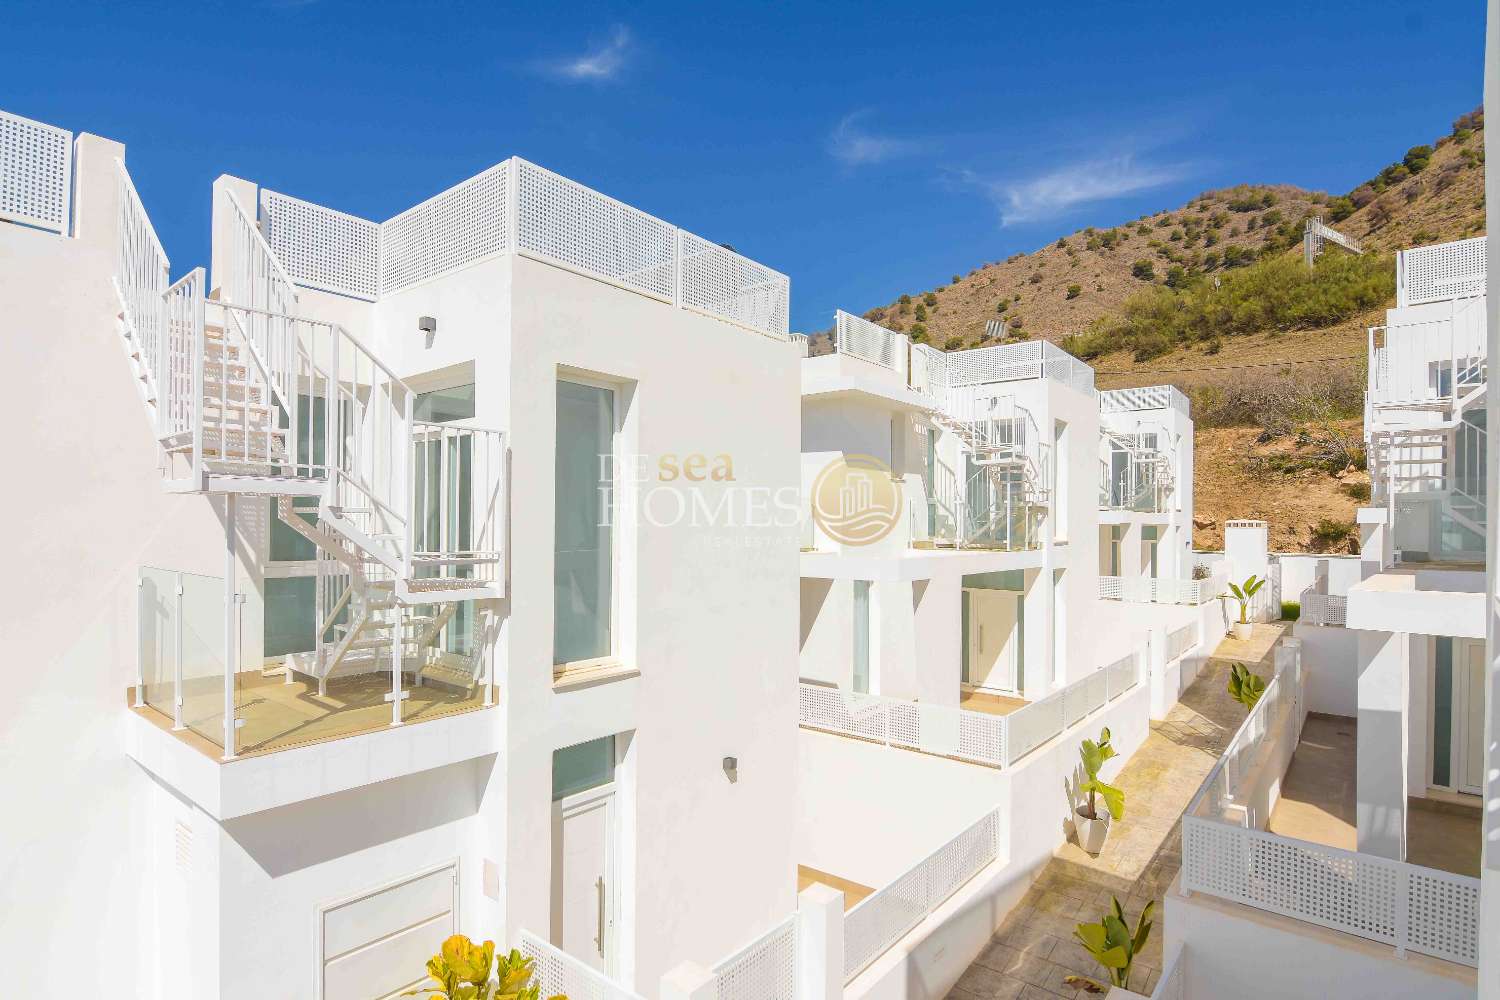 Newly built houses with private pools for sale in Nerja